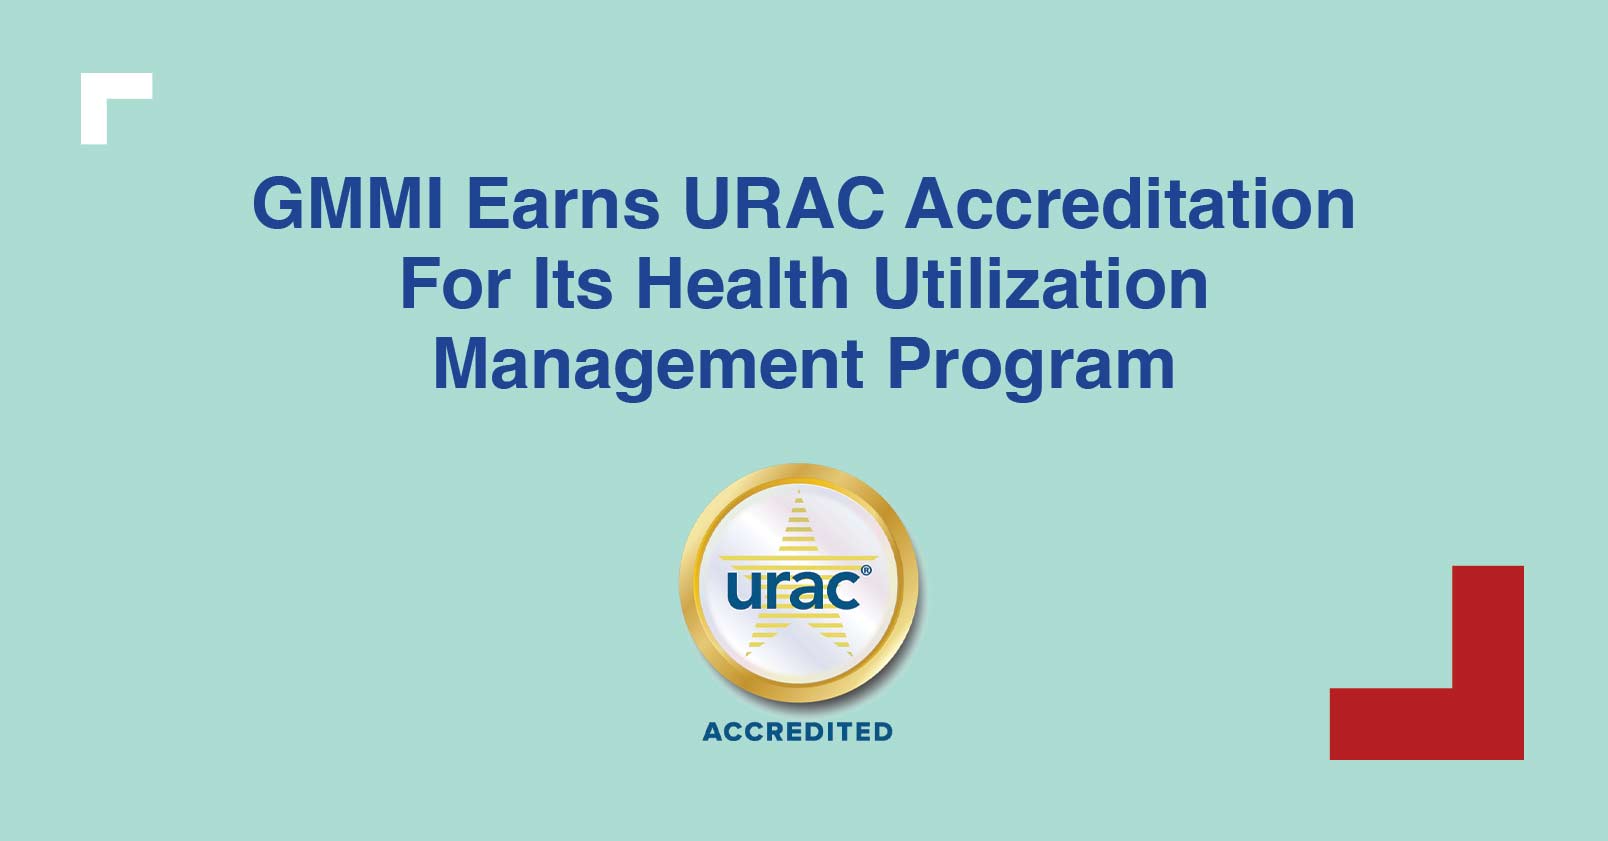 Featured Image Thumbnail: URAC Accredited